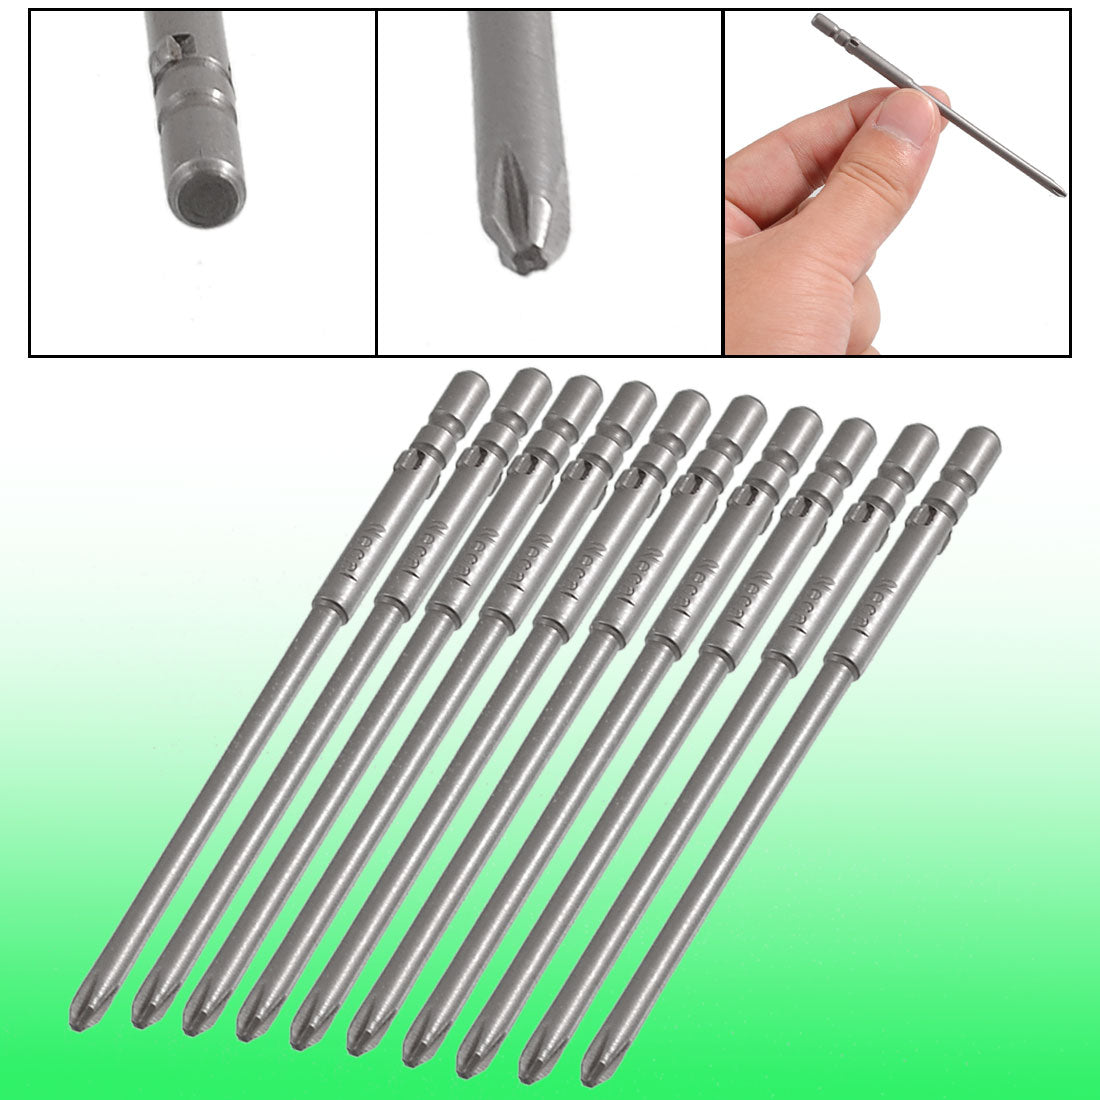 uxcell Uxcell 10 Pcs 4mm Shank 80mm Length 3mm Phillips PH1 Magnetic Screwdriver Bits